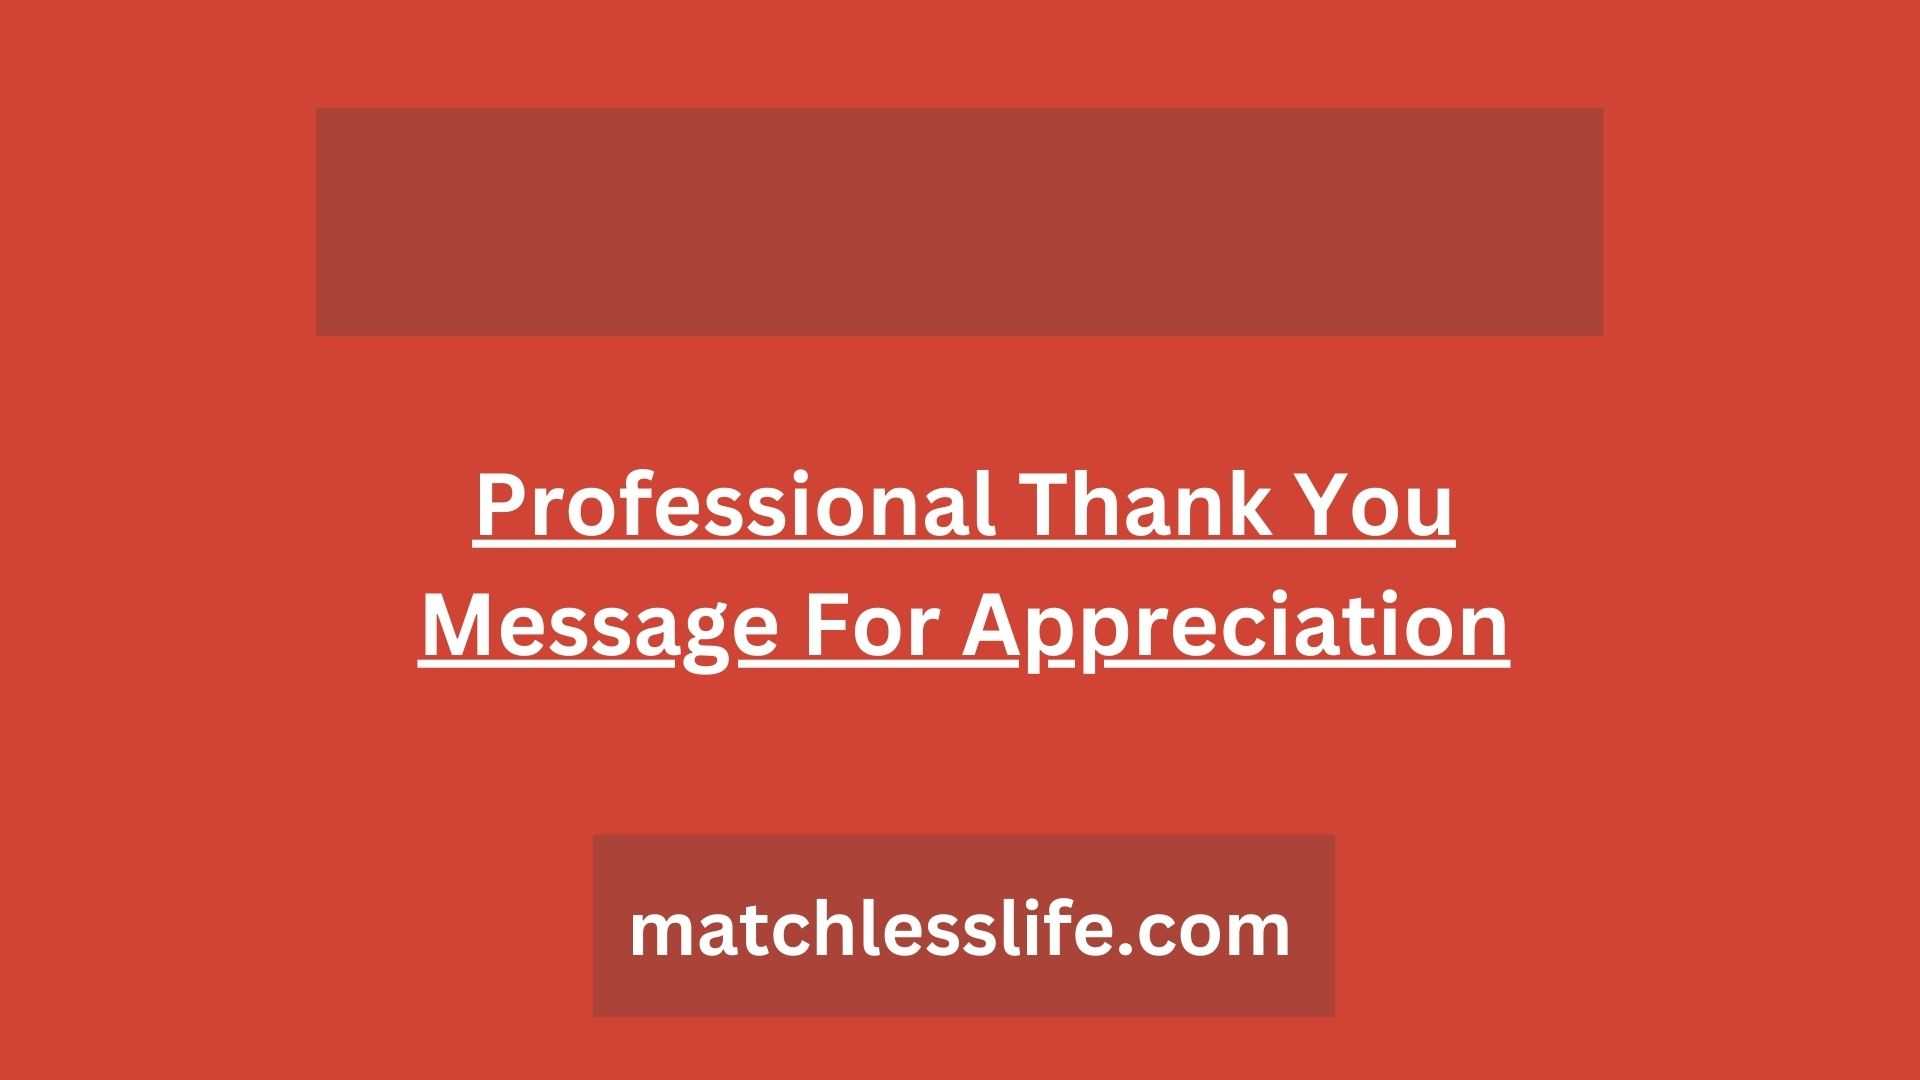 Professional Thank You Message For Appreciation